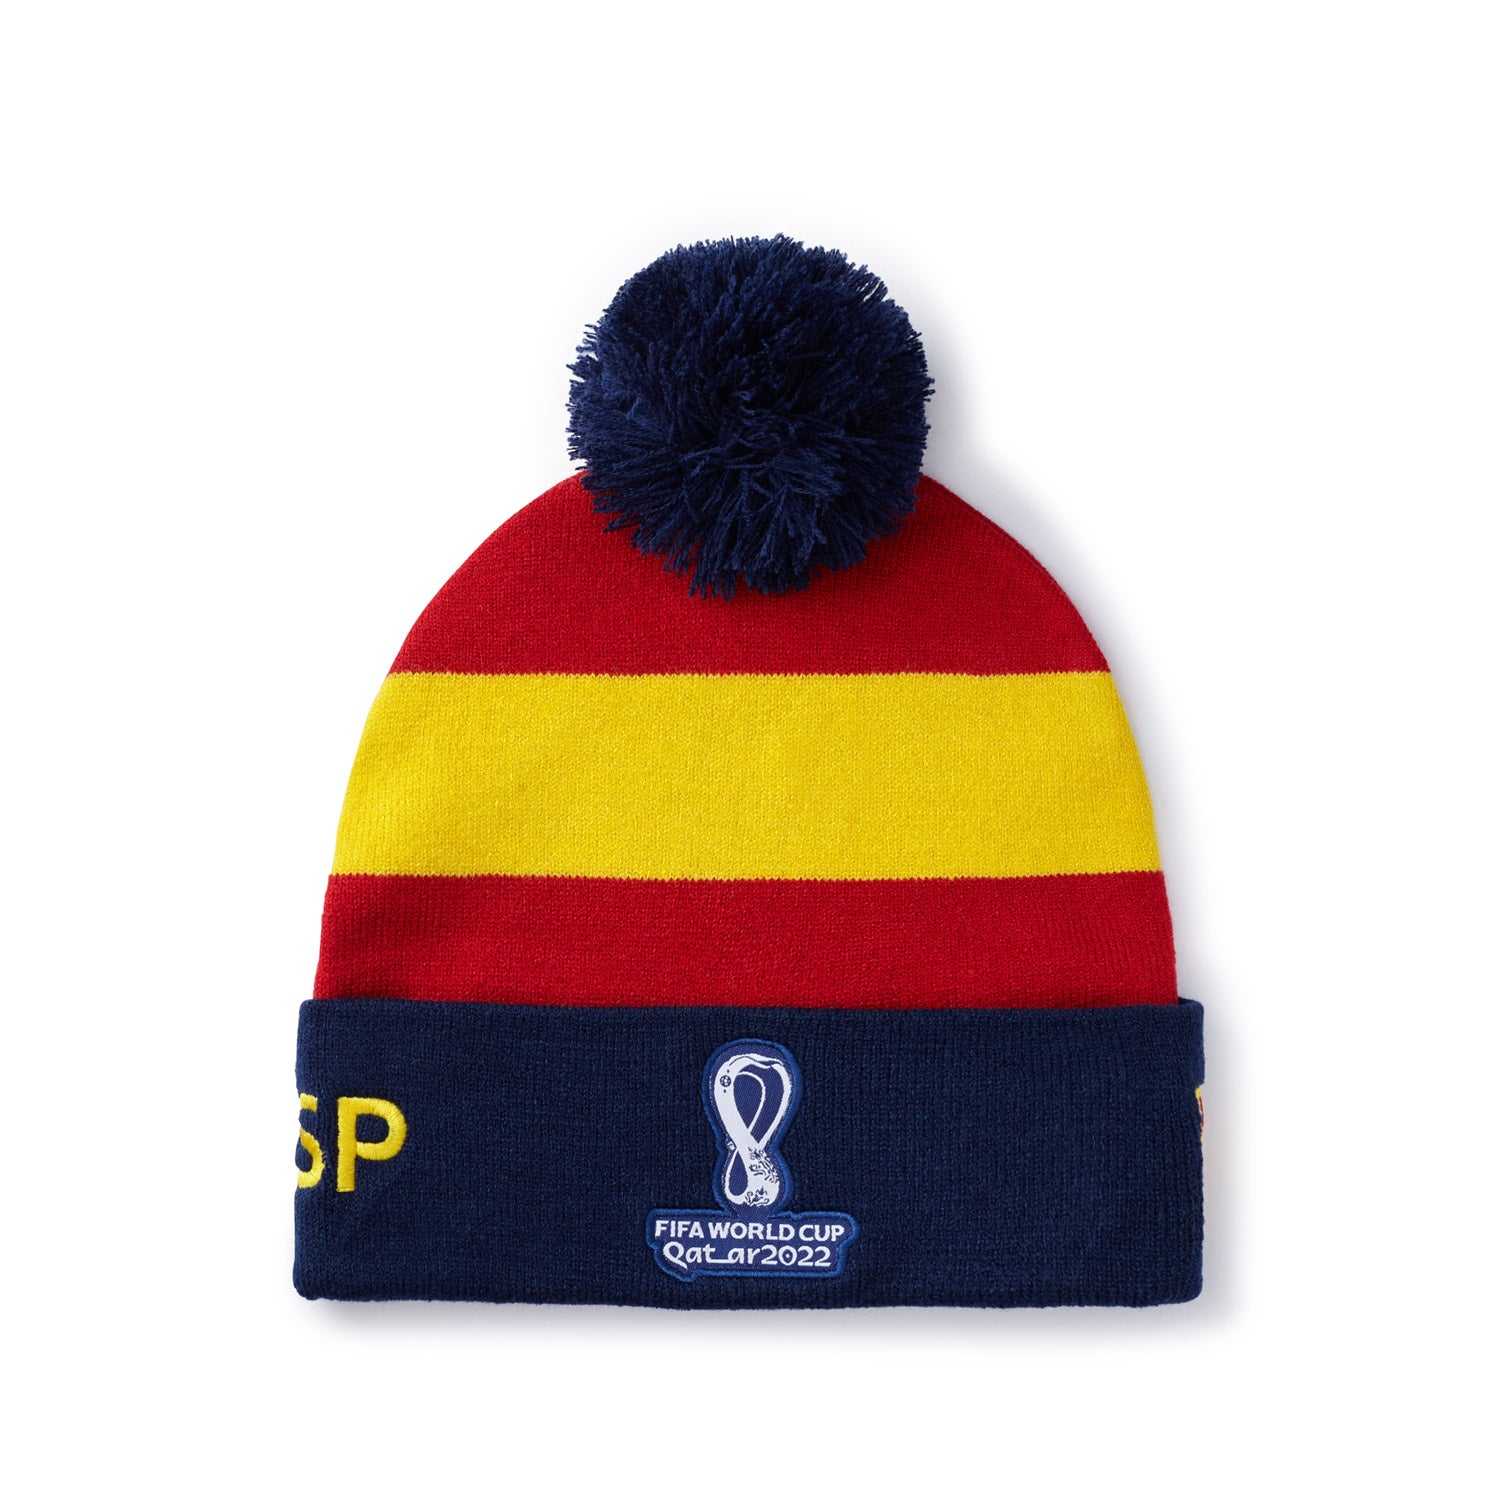 2022 World Cup Spain Blue Hat - Mens